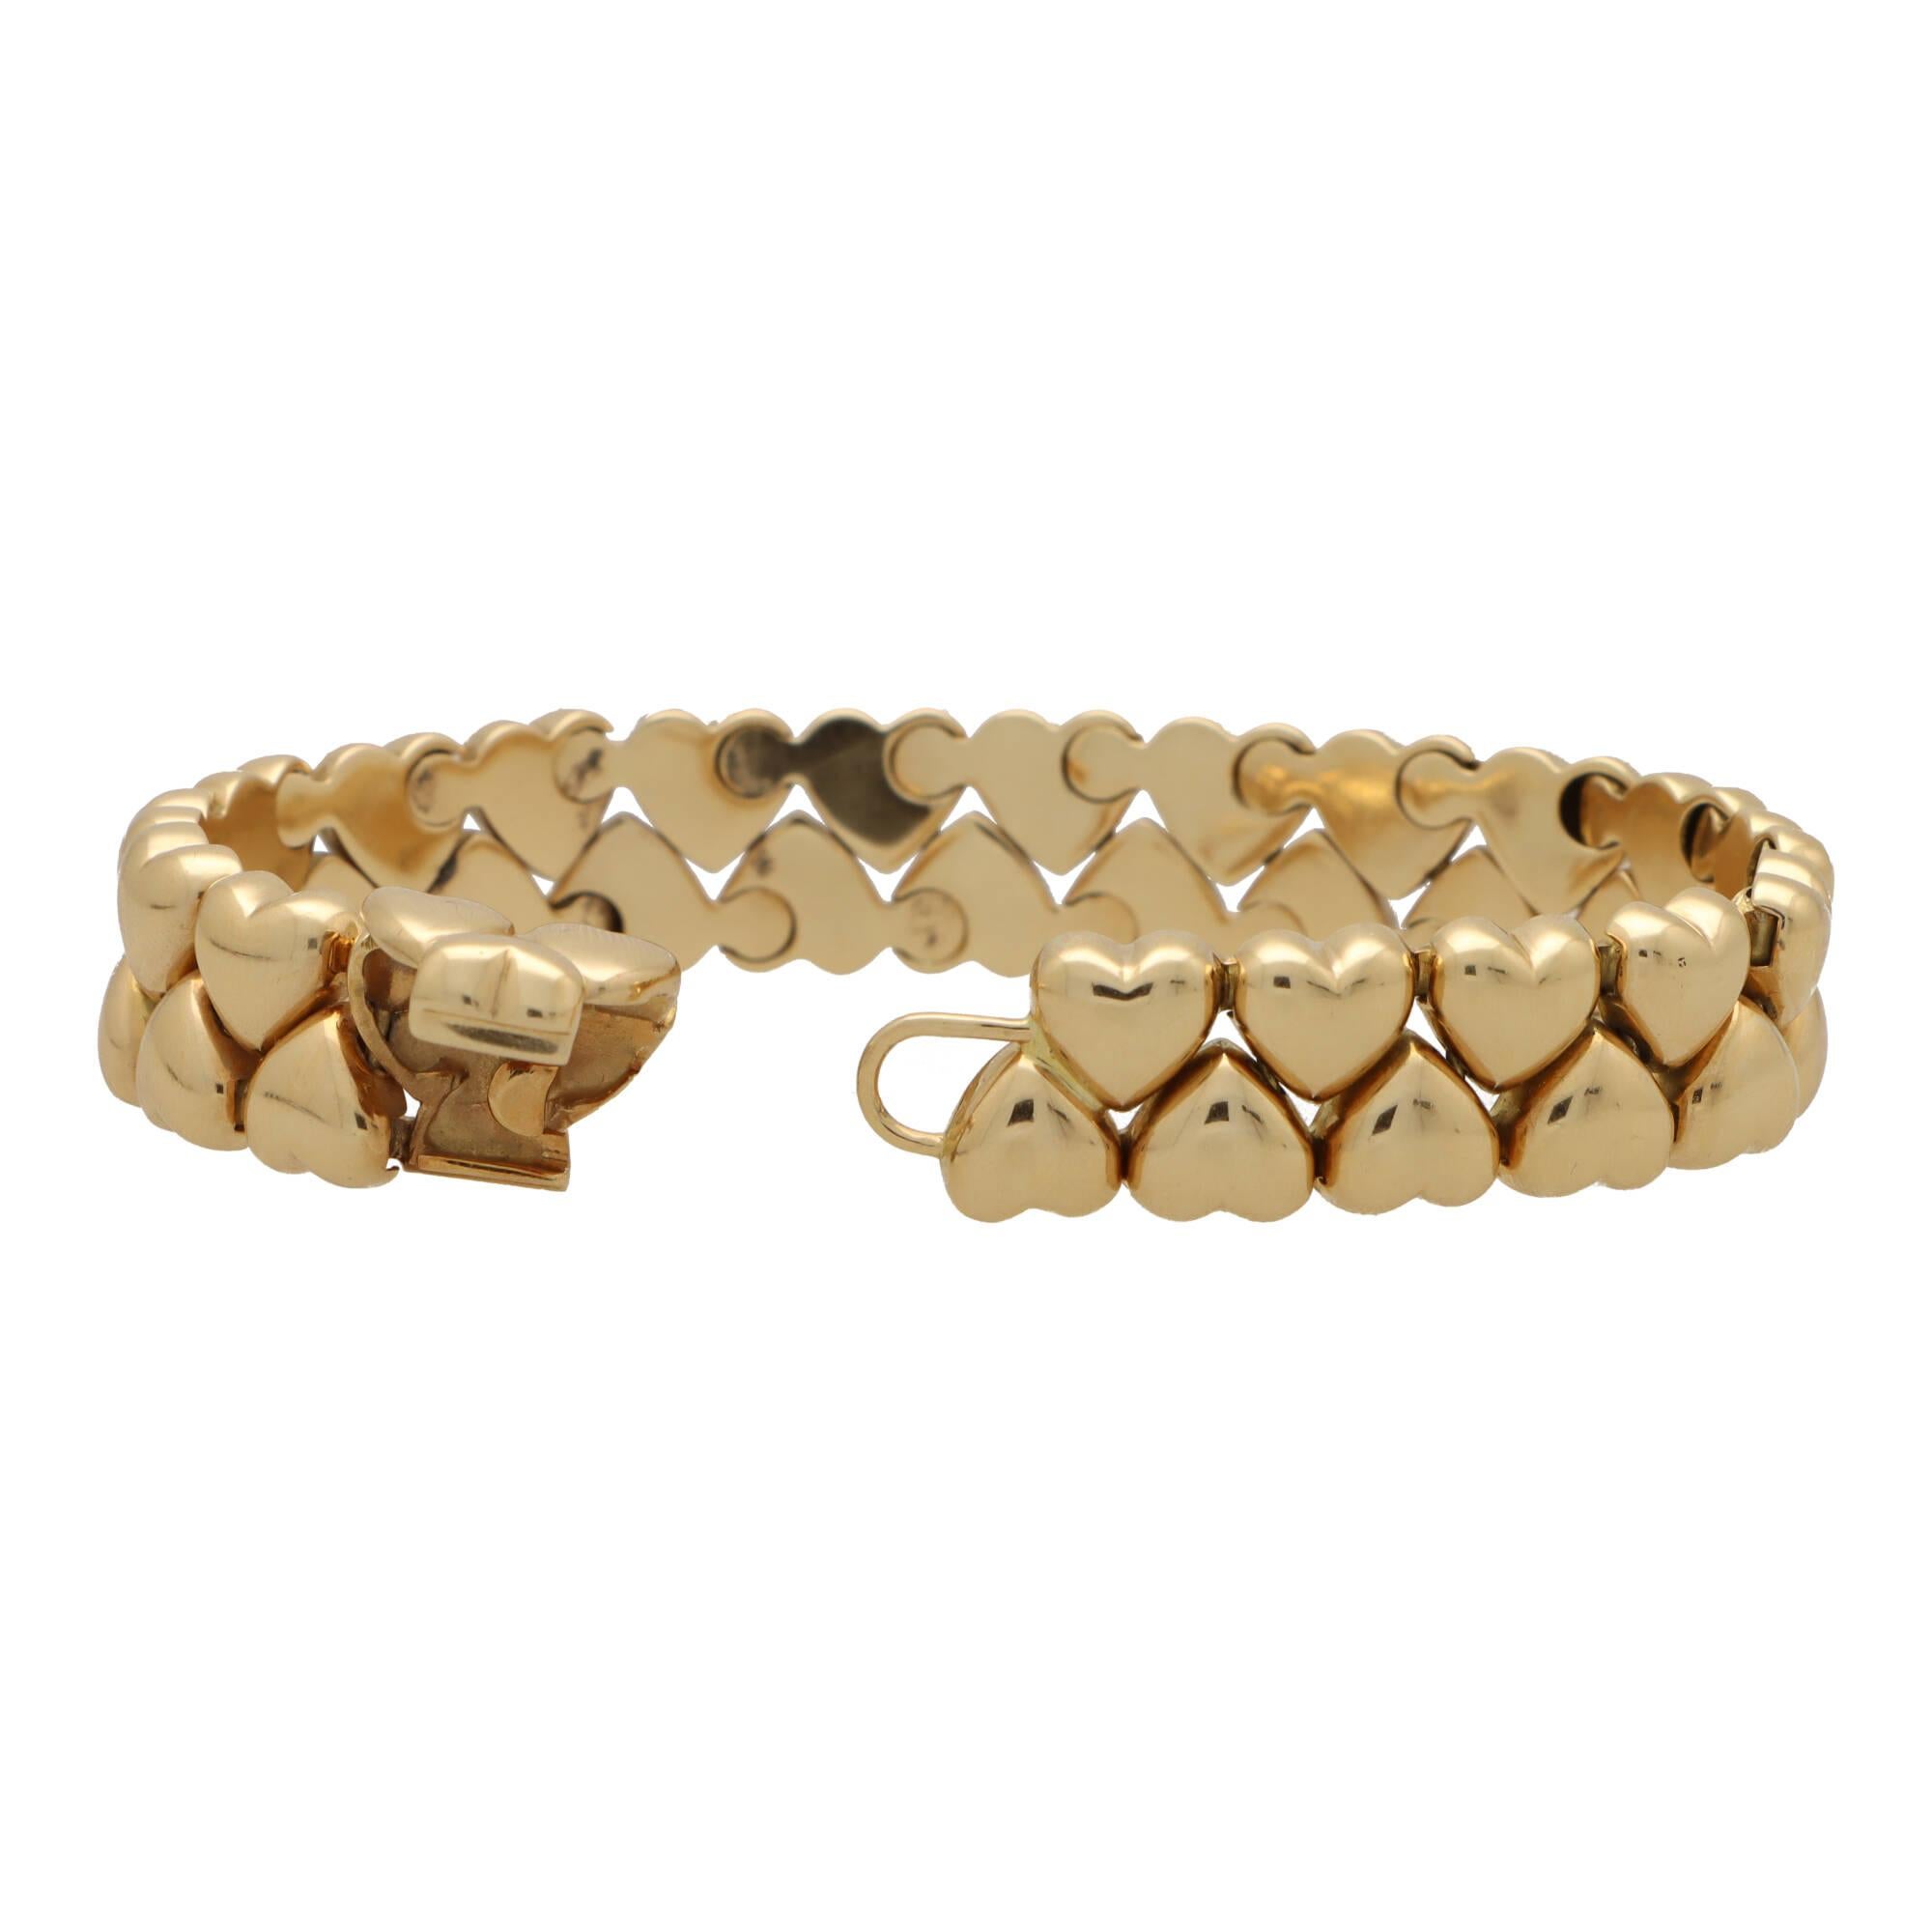 A beautiful vintage Cartier double heart bracelet set in 18k yellow gold.

From the now discontinued Cartier Heart collection, the bracelet is composed of 2 rows of heart motifs, connected by an articulated setting. Every heart is polished yellow